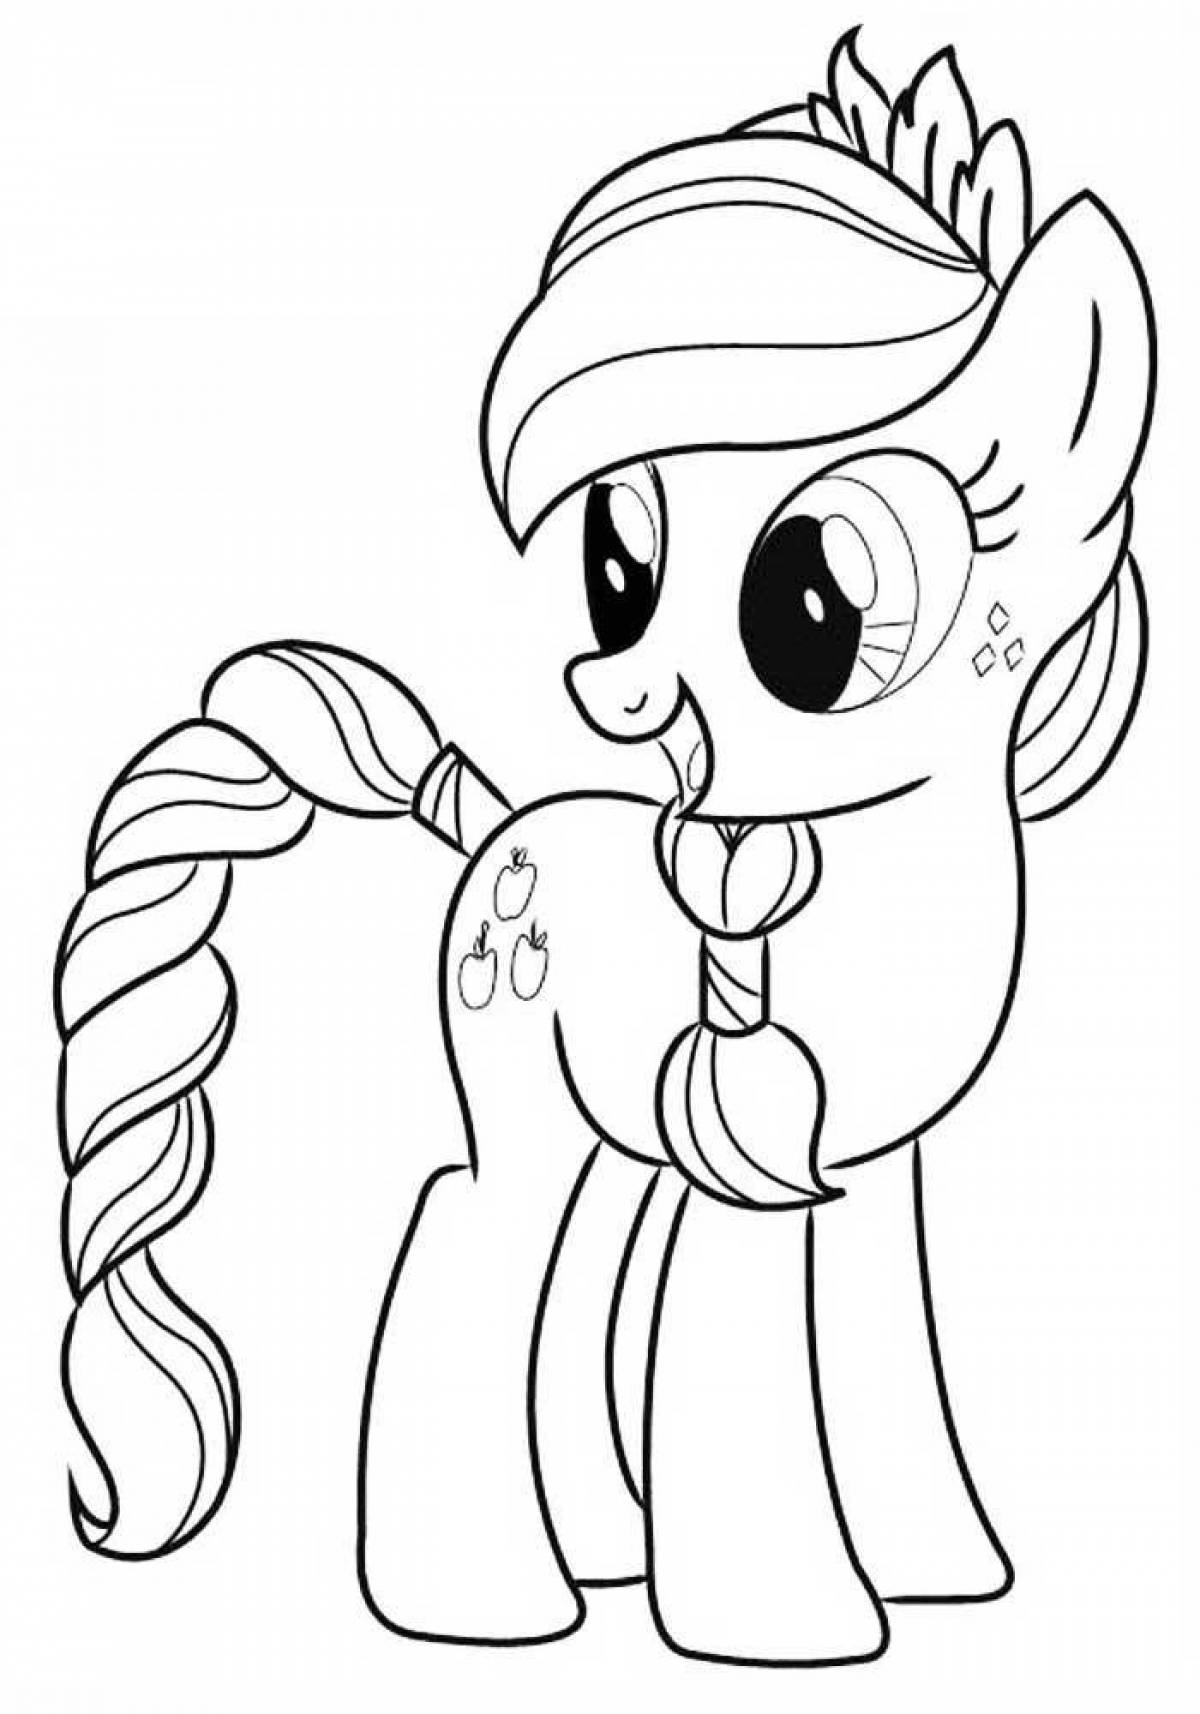 Playful pony coloring book